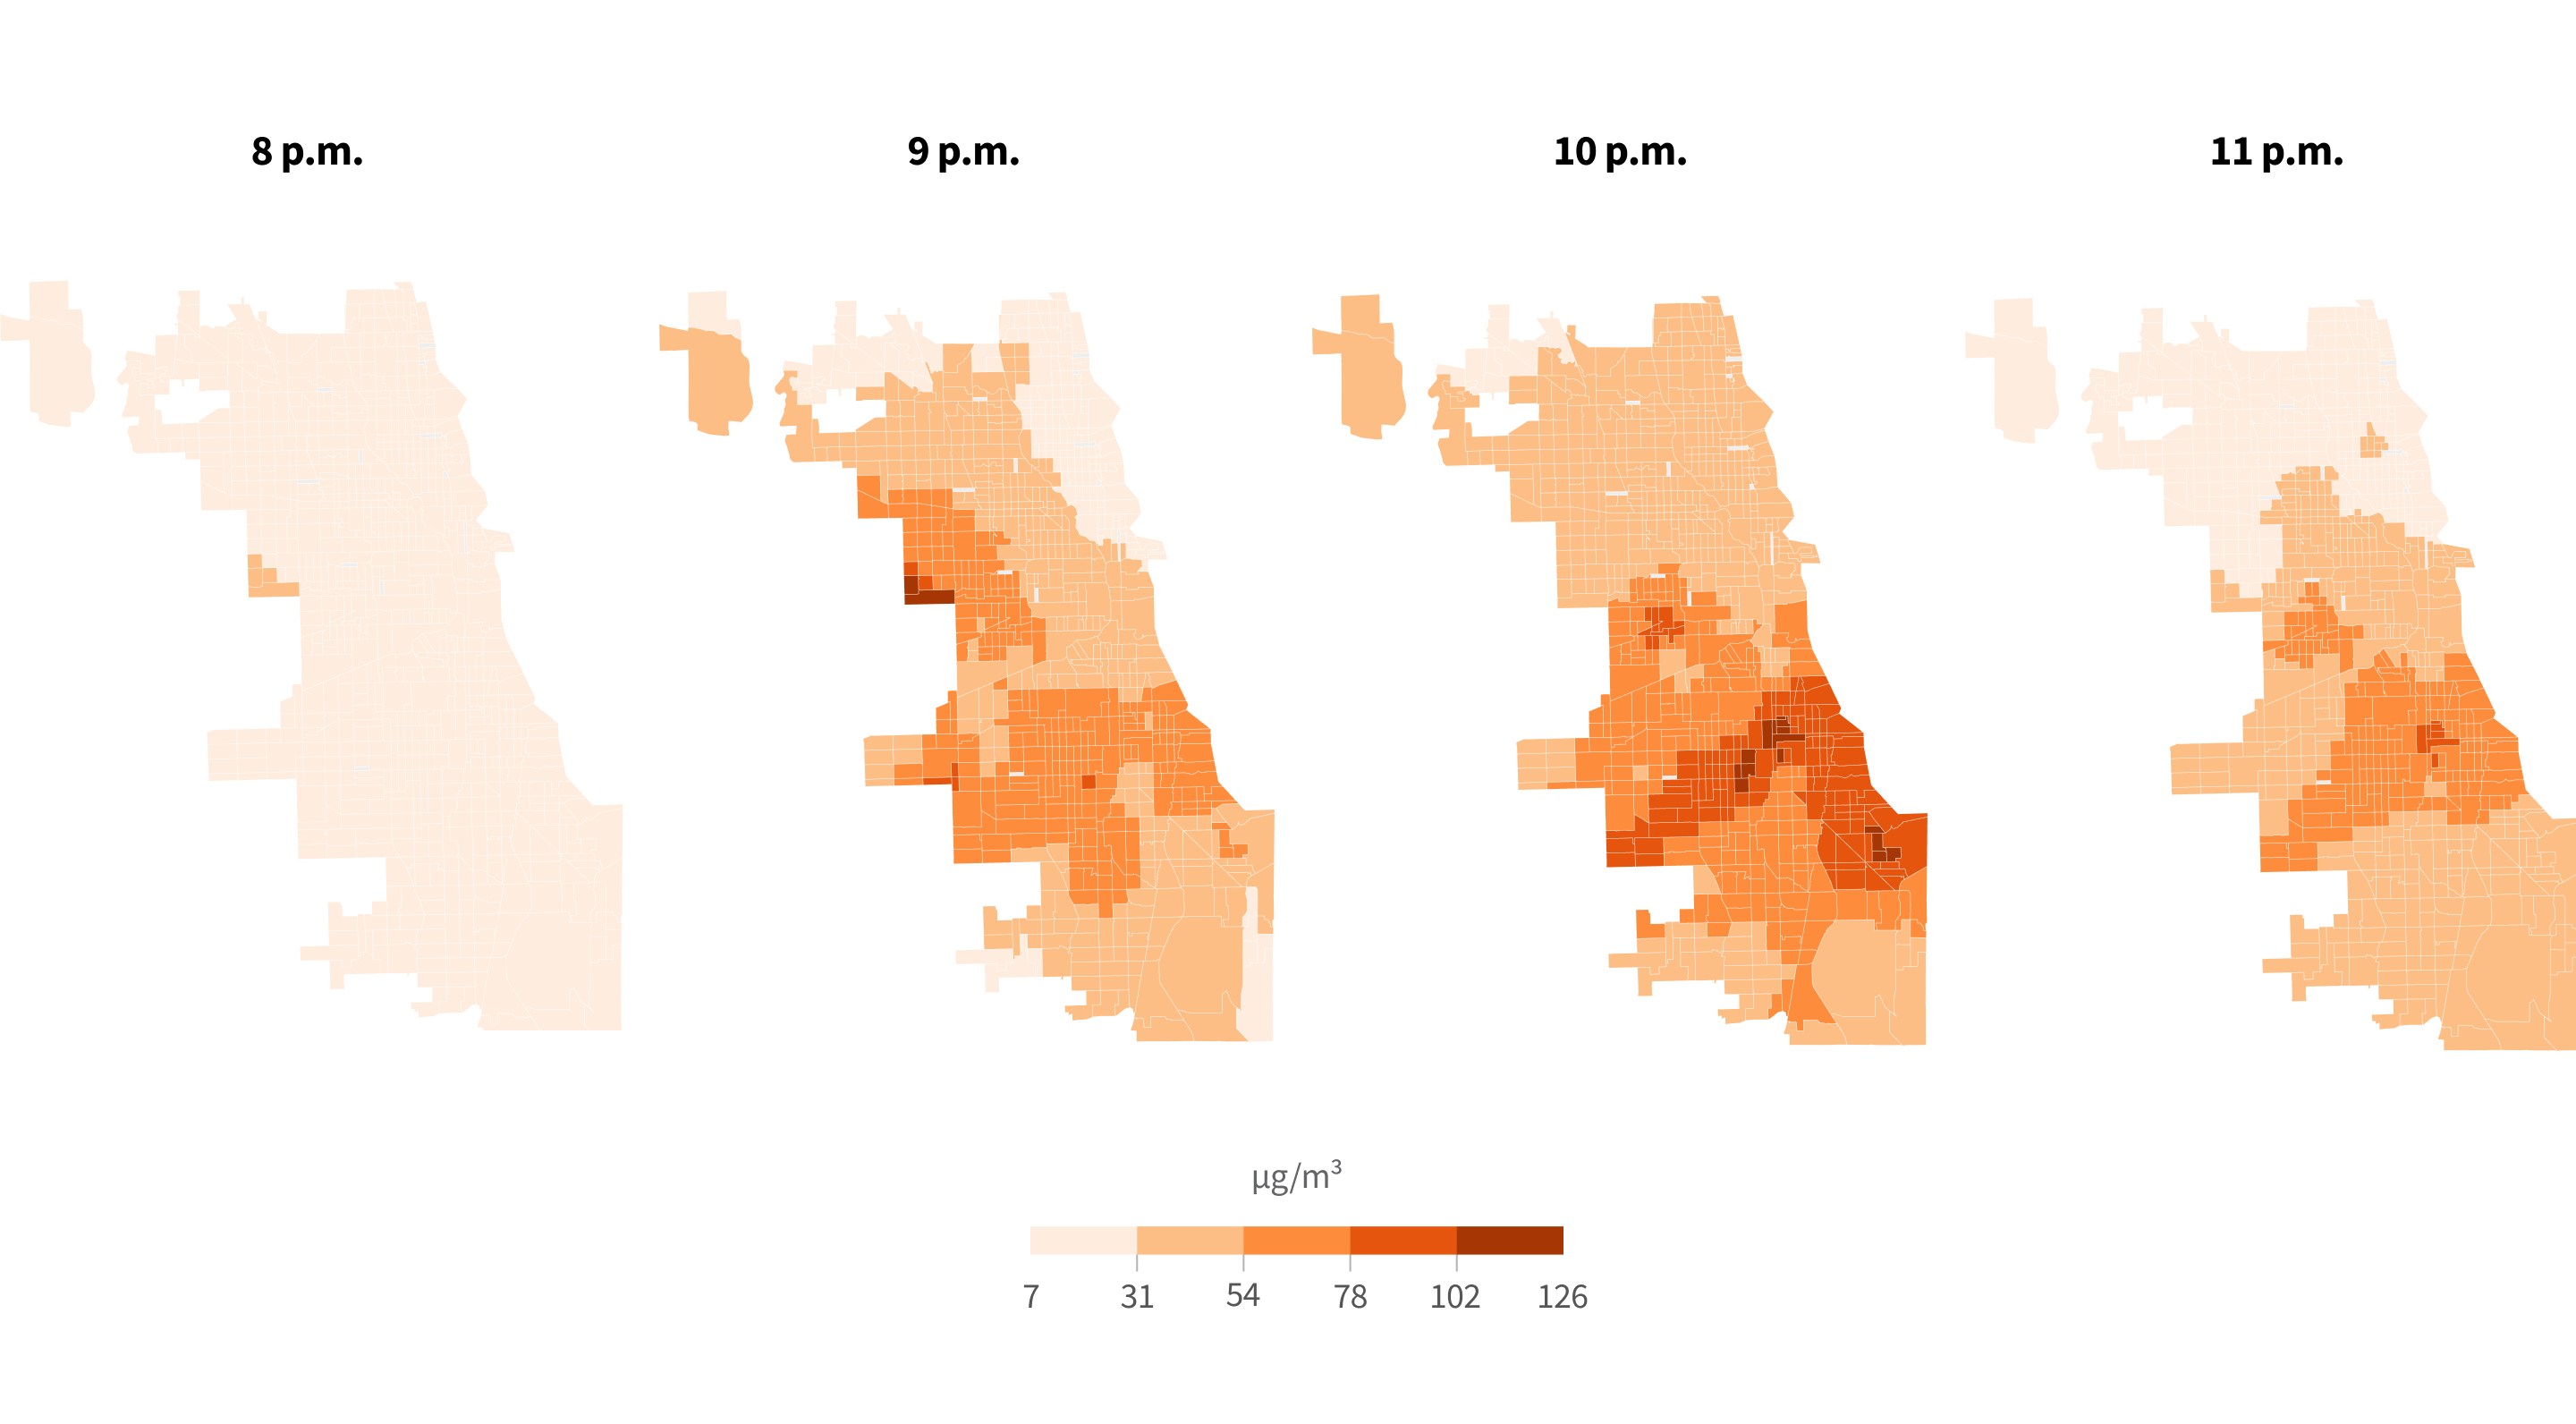 Last Fourth of July, Chicago saw a dangerous spike in air pollution between 9 p.m. and midnight. Data courtesy of the Microsoft Research Eclipse Project.